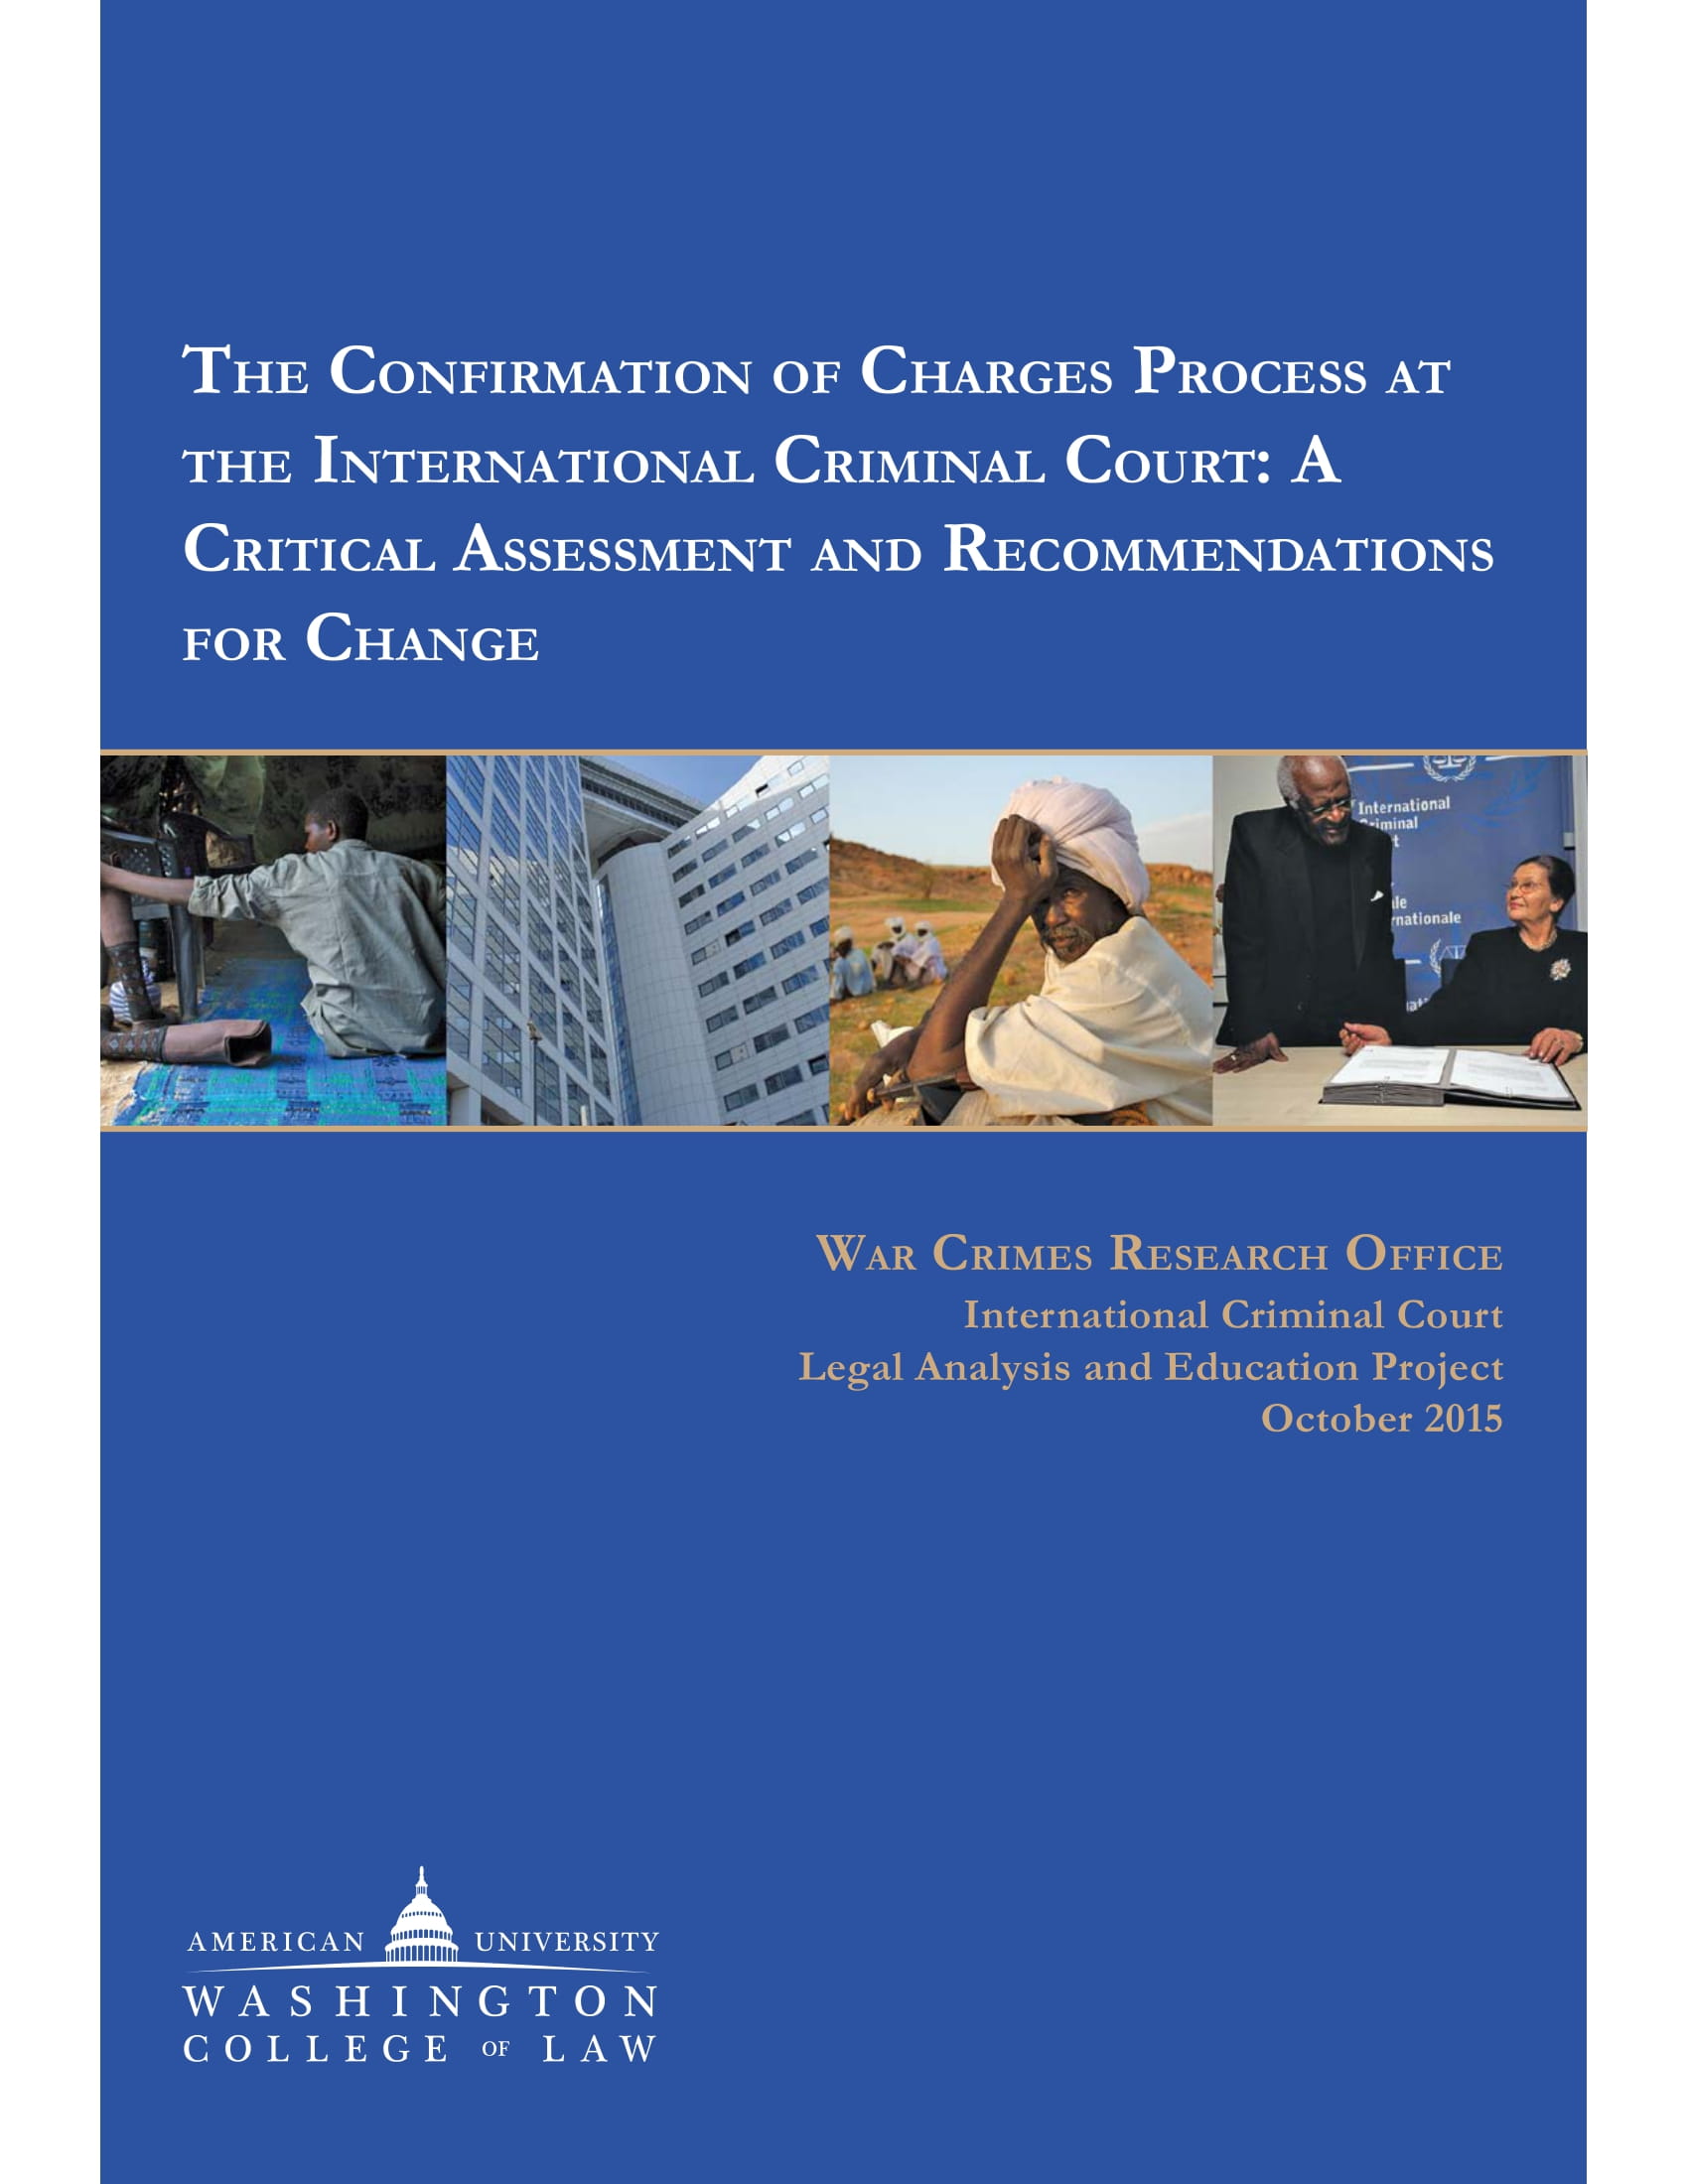 Report 19: The Confirmation of Charges Process at the ICC: A Critical Assessment and Recommendations for Change